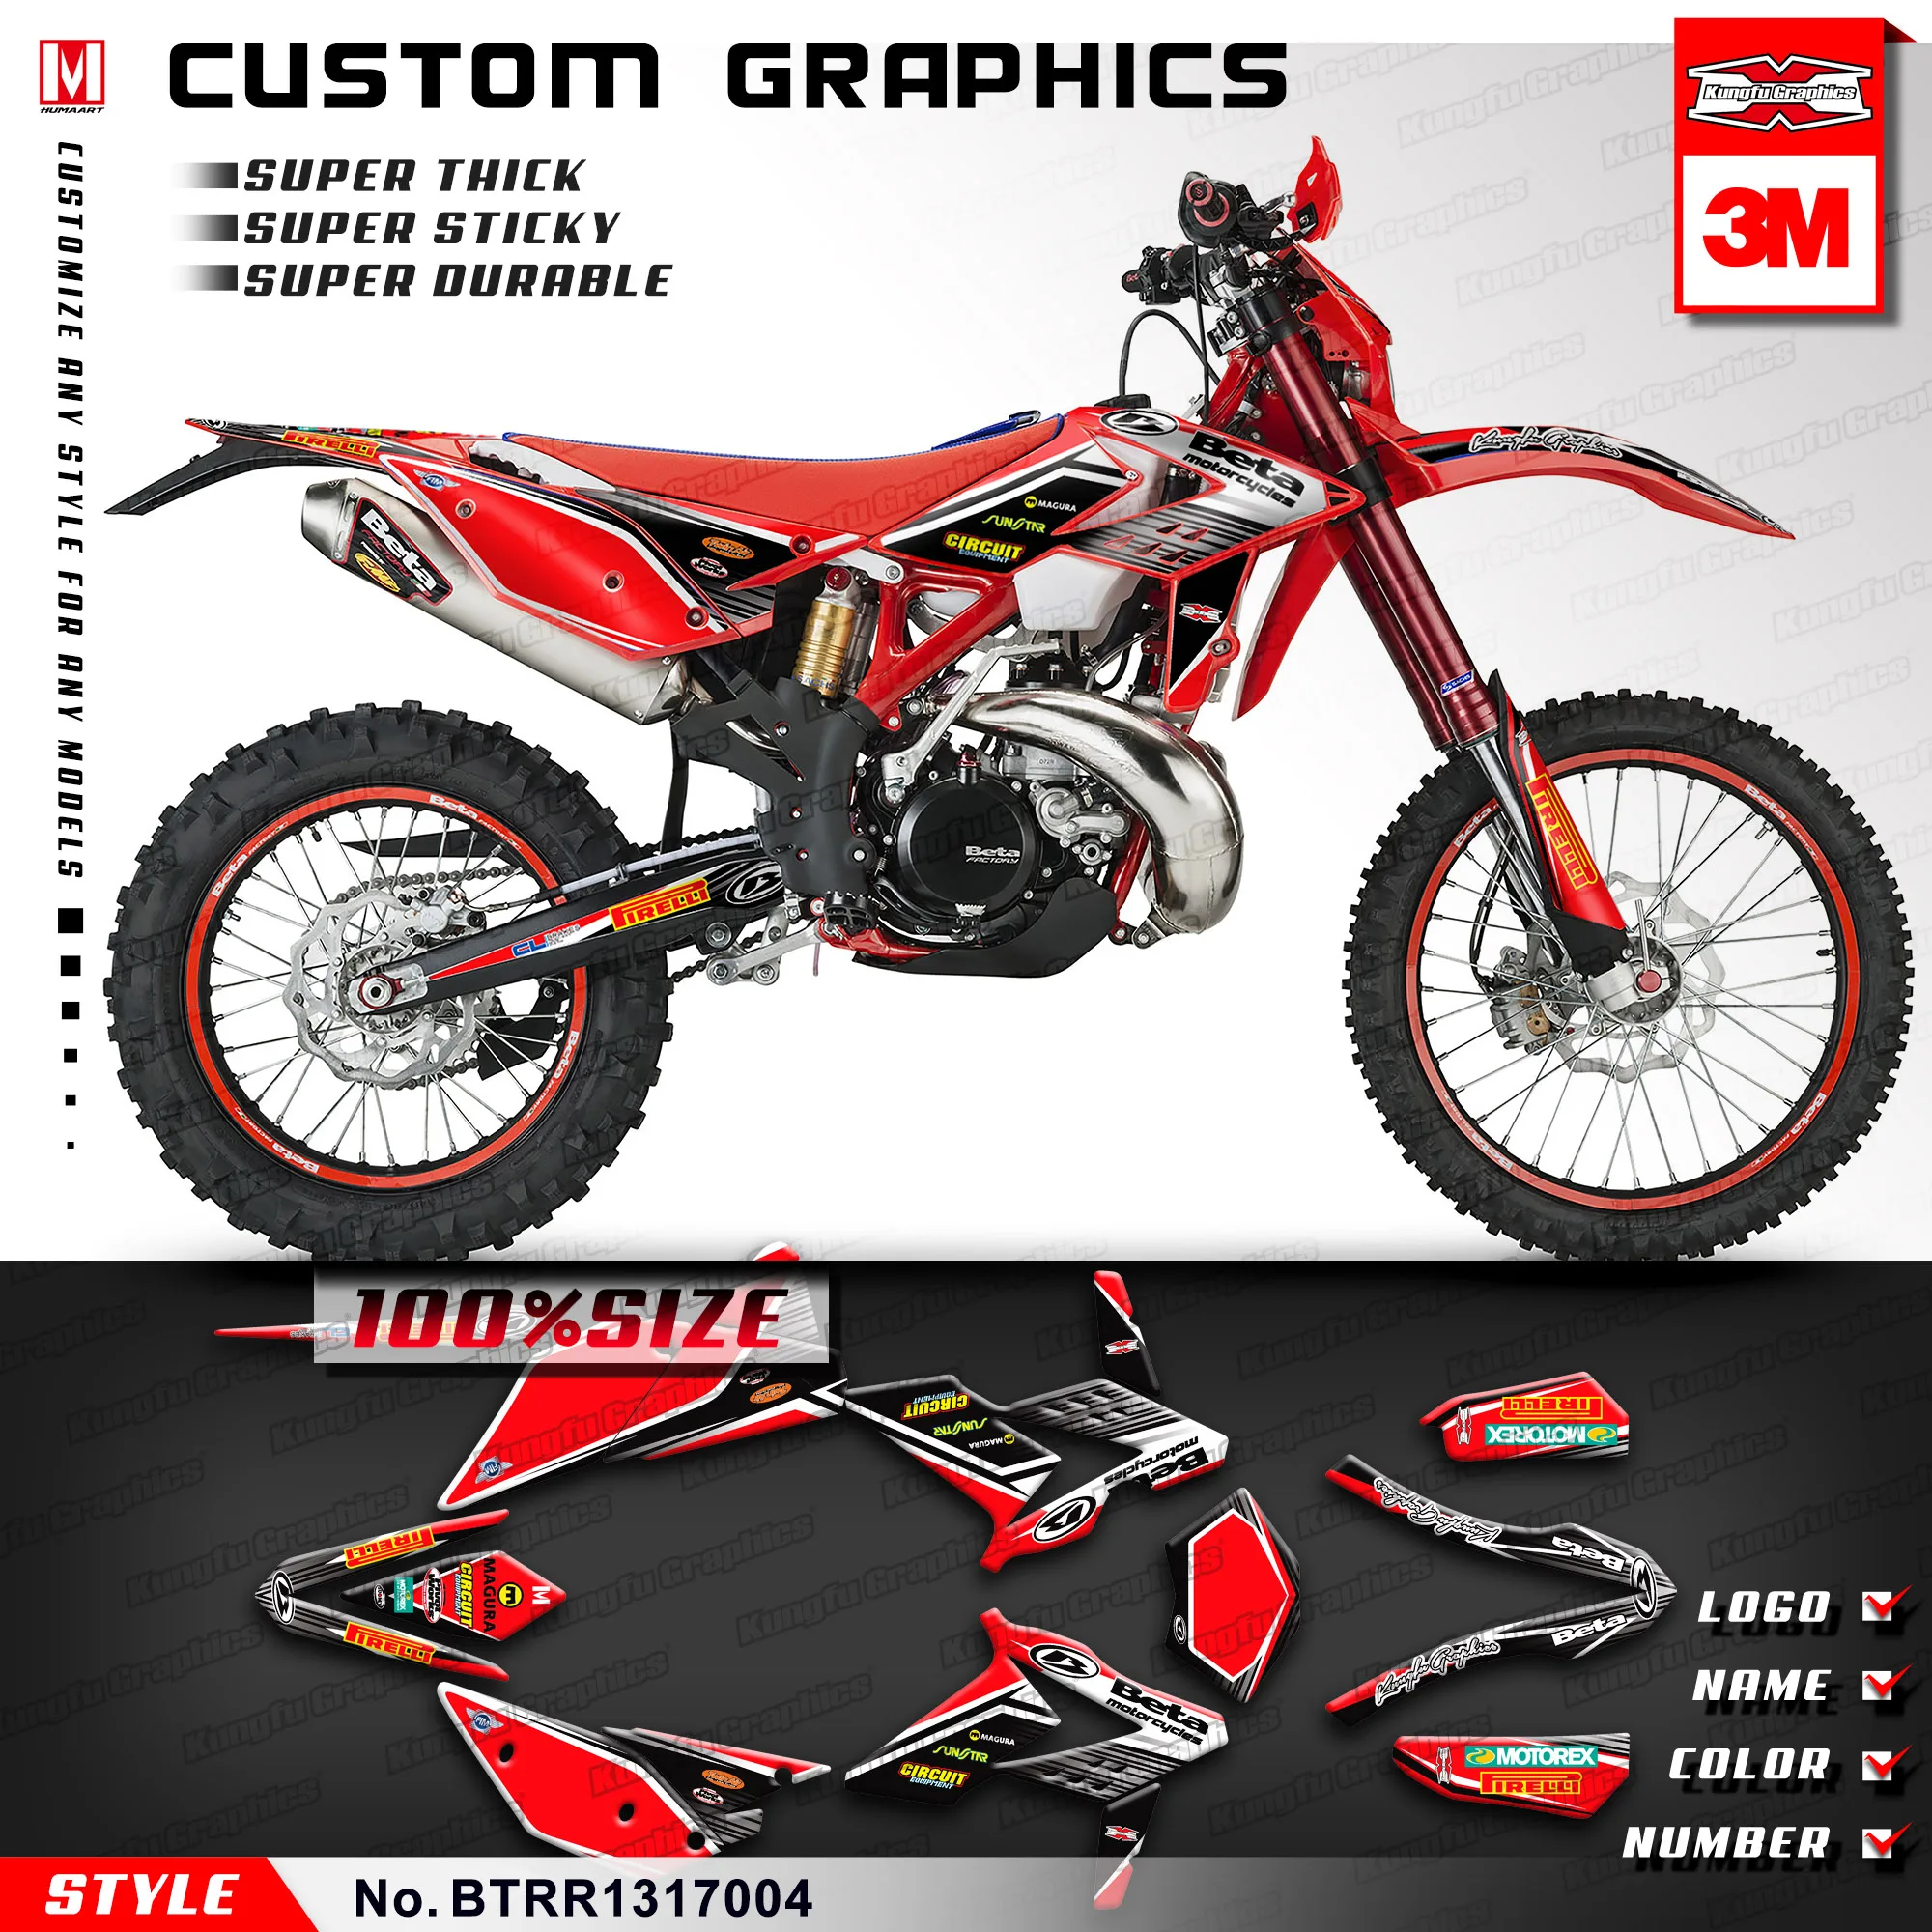 

KUNGFU GRAPHICS Custom Stickers Kit Decals for Beta 250 300 350 390 430 480 RR 2013 2014 2015 2016 2017 (Style no. BTRR1317004)